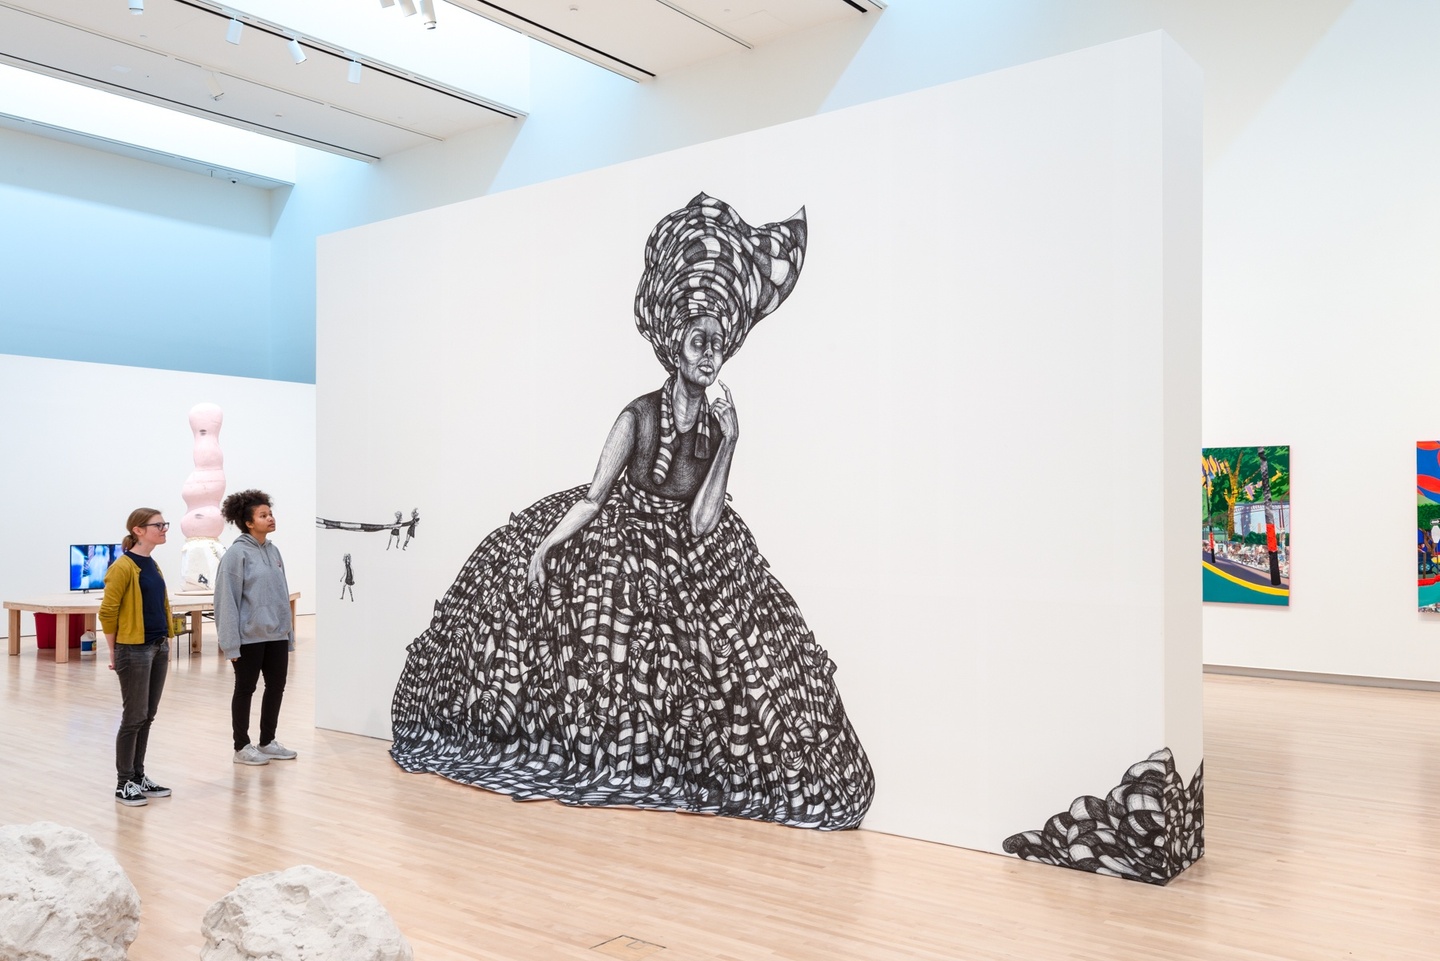 Gallery view of the installation Source of All Hair, Wearer of All Socks. A ballpoint pen drawing of a lady with a wrap headdress made of striped material and a large poofy dress of the same striped material